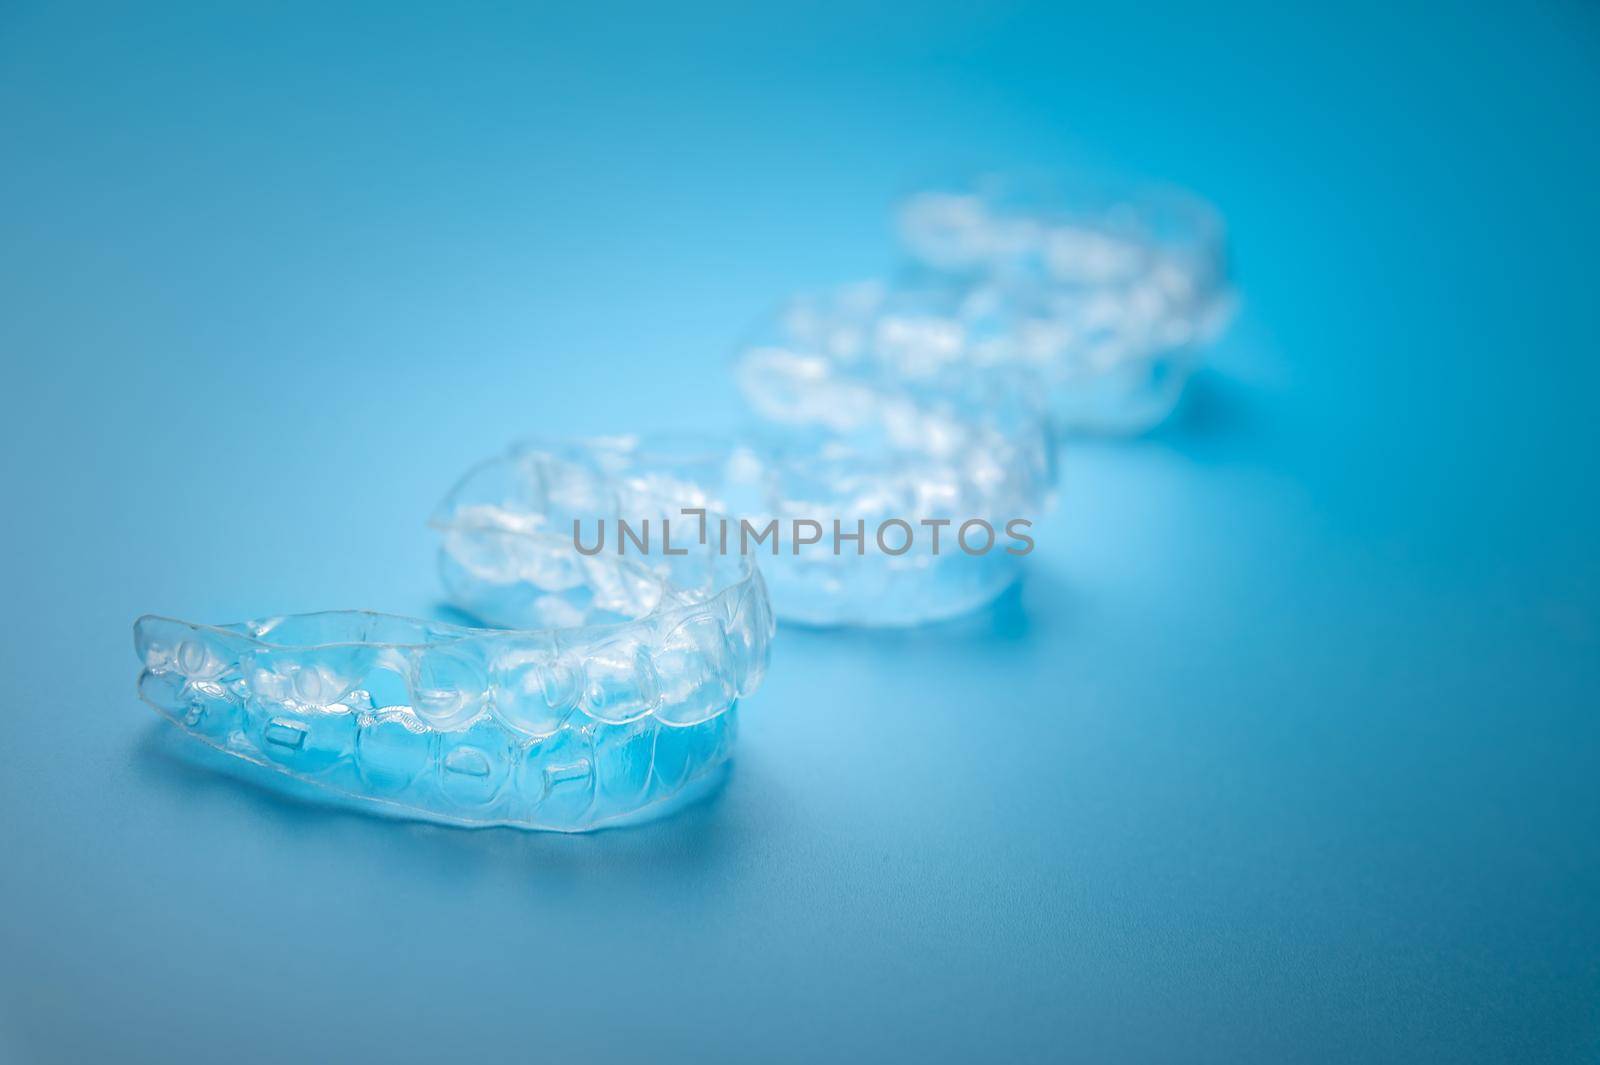 Invisible aligners on a blue background with copy space. Plastic braces for teeth alignment.